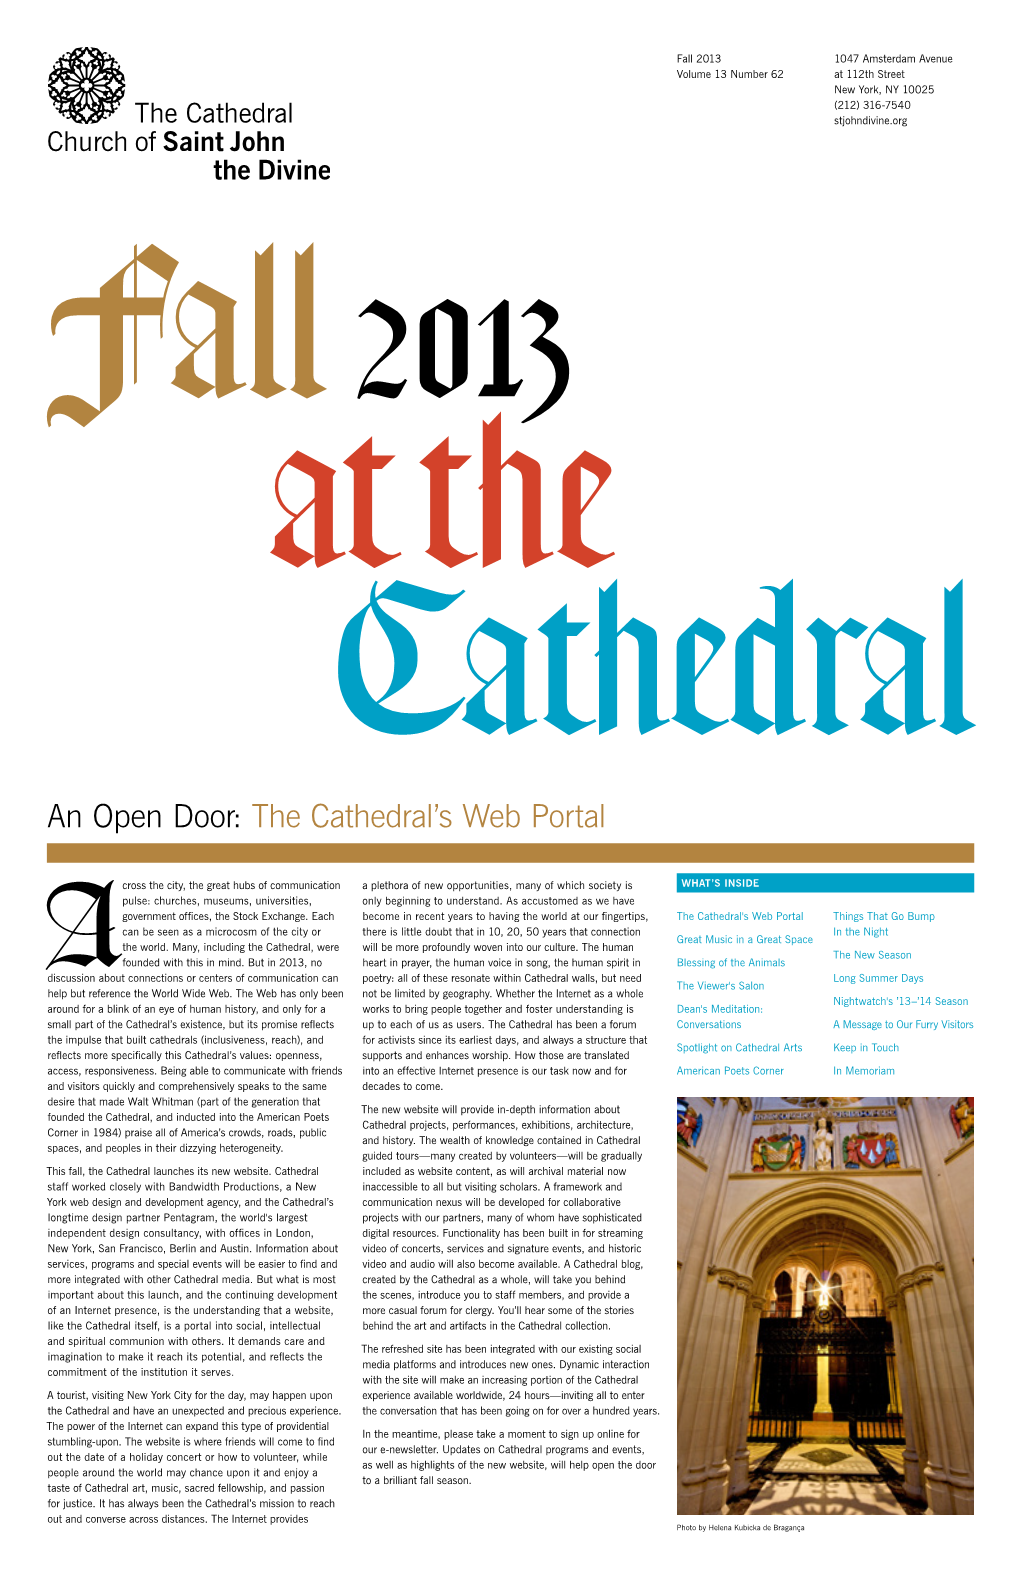 An Open Door: the Cathedral's Web Portal